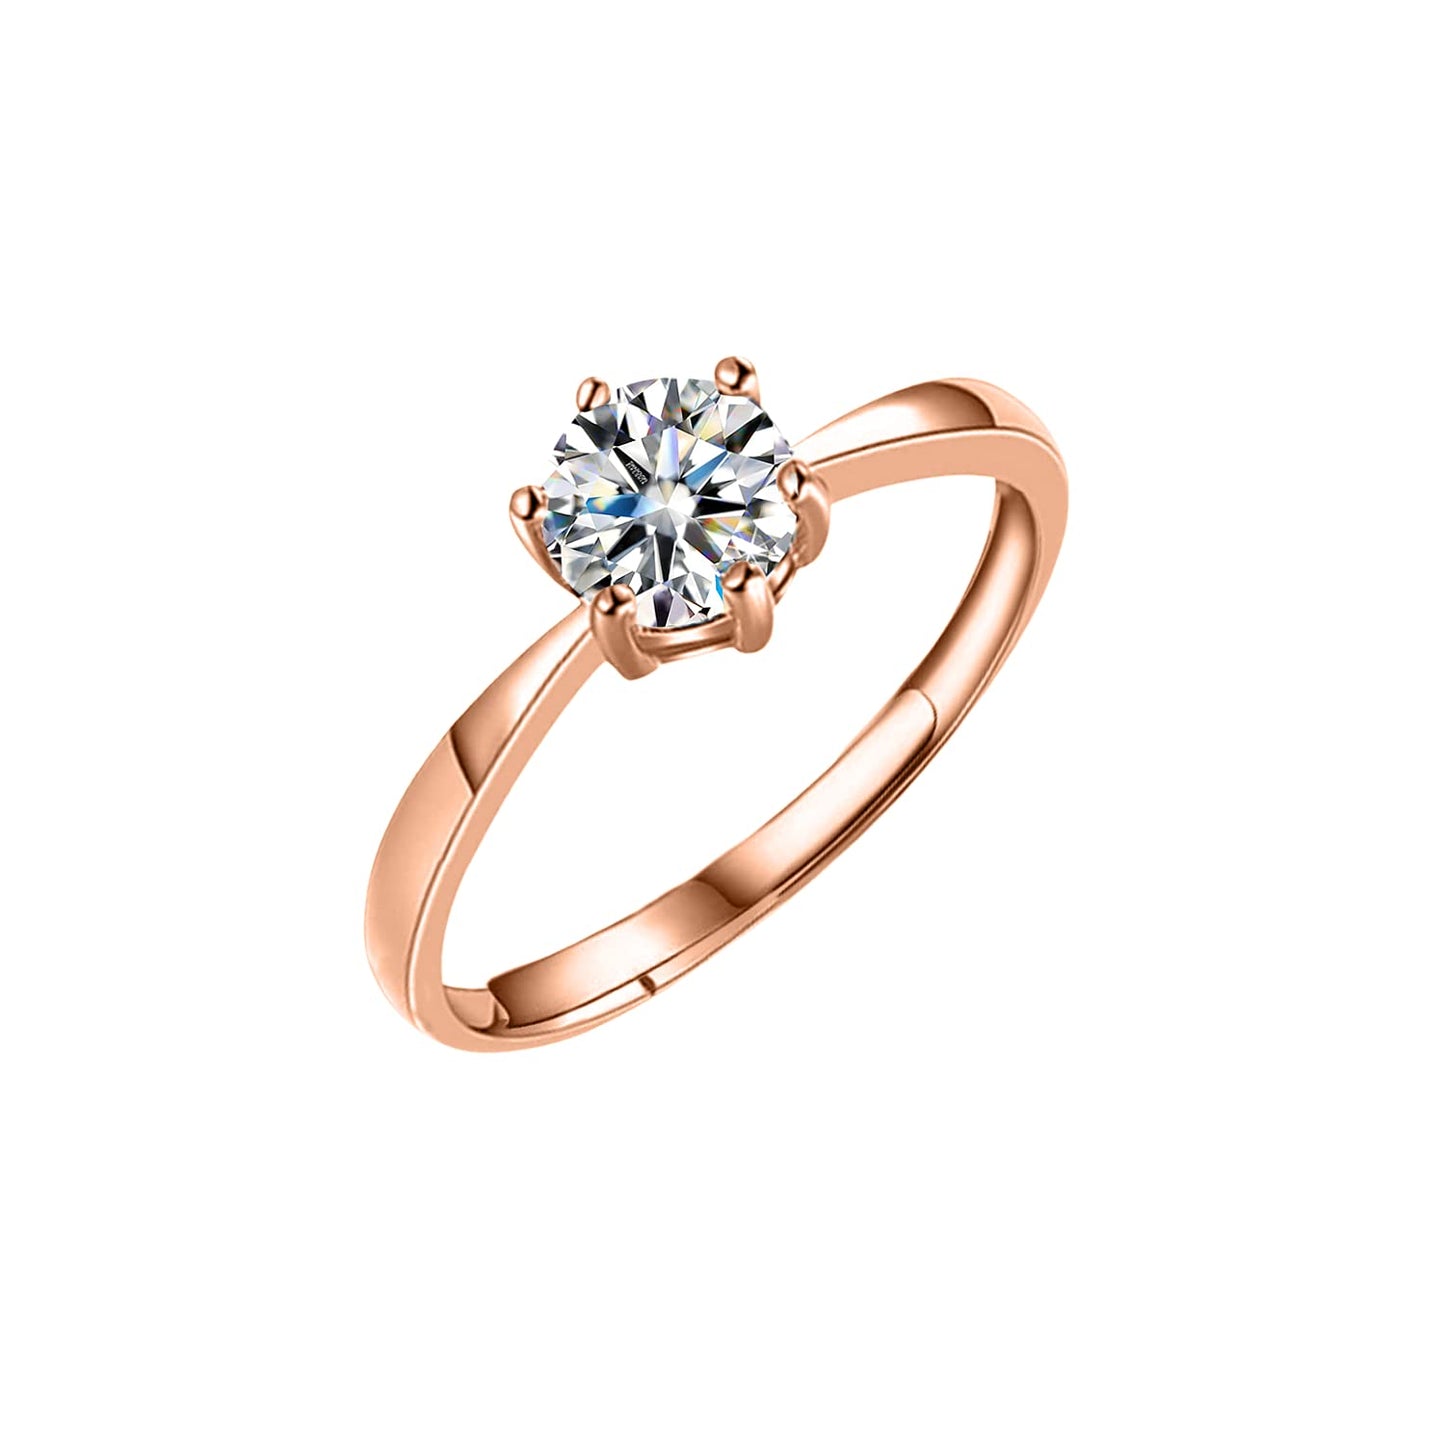 Solitaire Ring Classic Adjustable in 92.5 Silver embellished with Swarovski Zirconia - 18K Rose Gold Finish